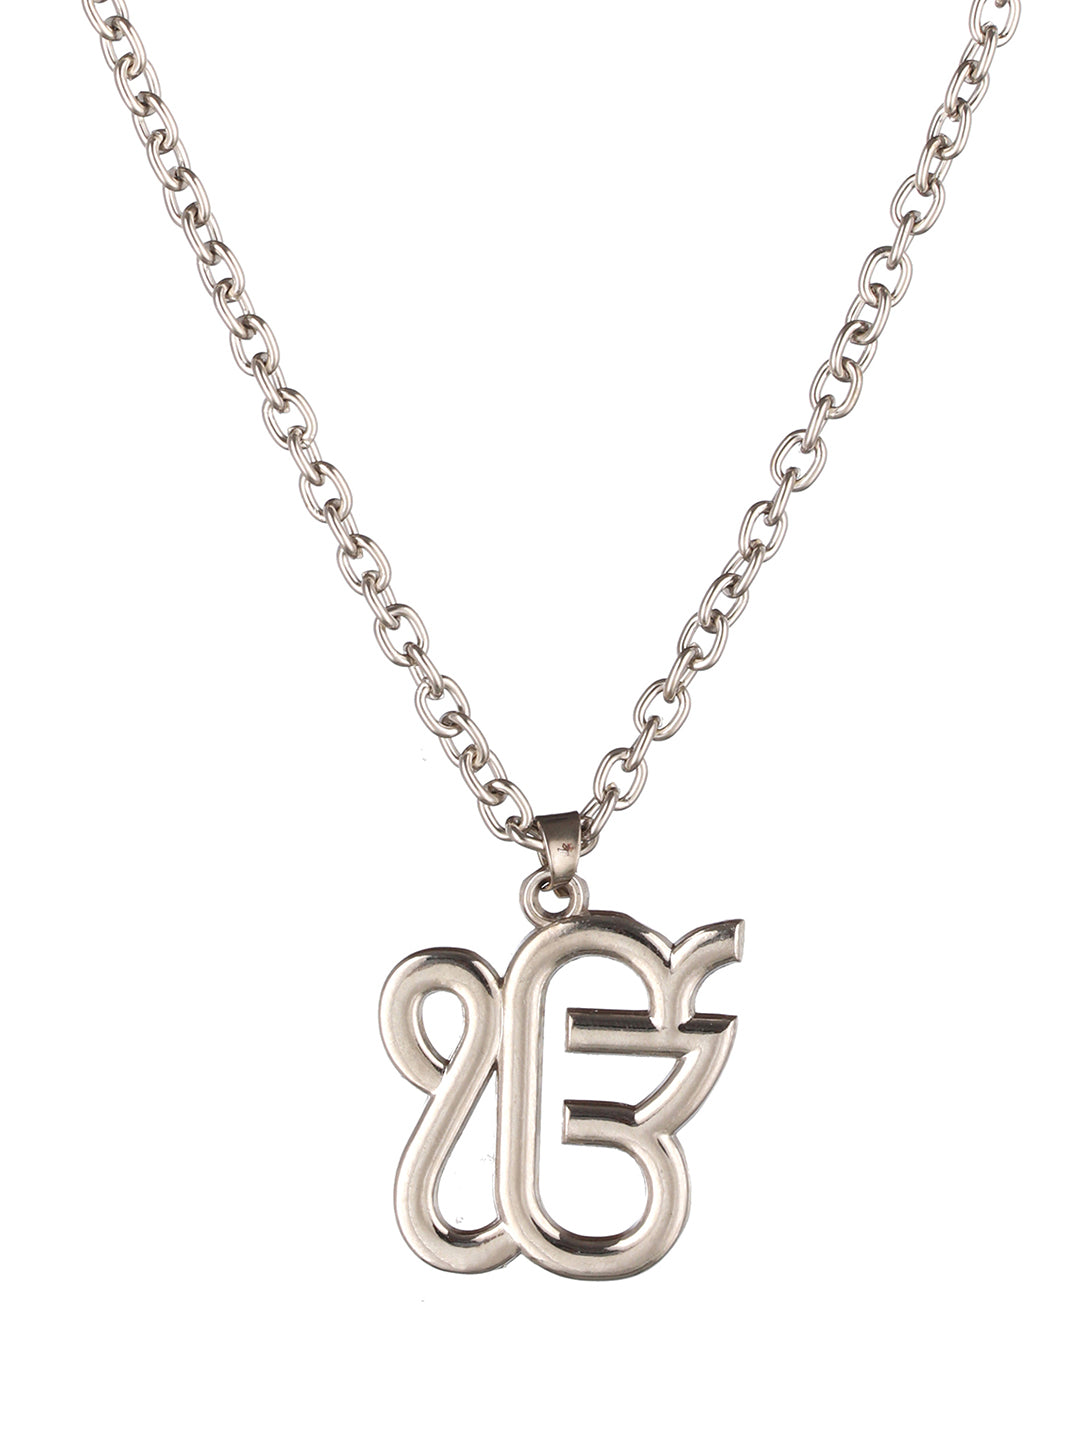 Bold by Priyaasi Ek Onkar Pendant with Silver-Plated Link Chain for Men